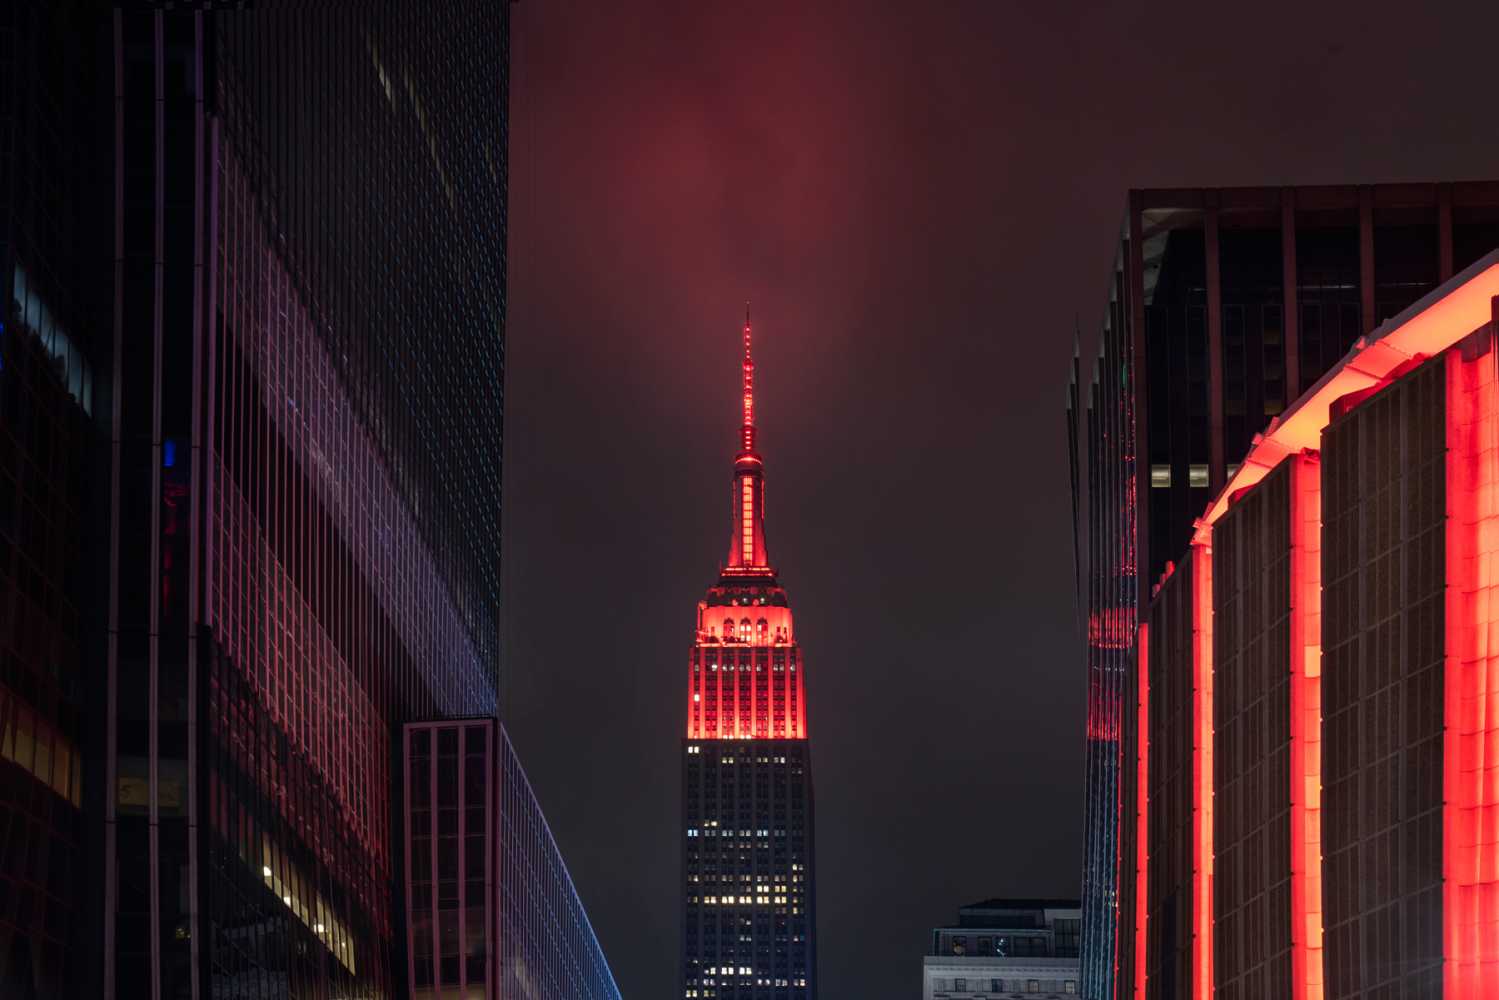 As unemployment soars, 25 countries join together to represent over 30 million workers in the worldwide events industry (New York’s Empire State Building joins the fight – Photo: Bob Carey)